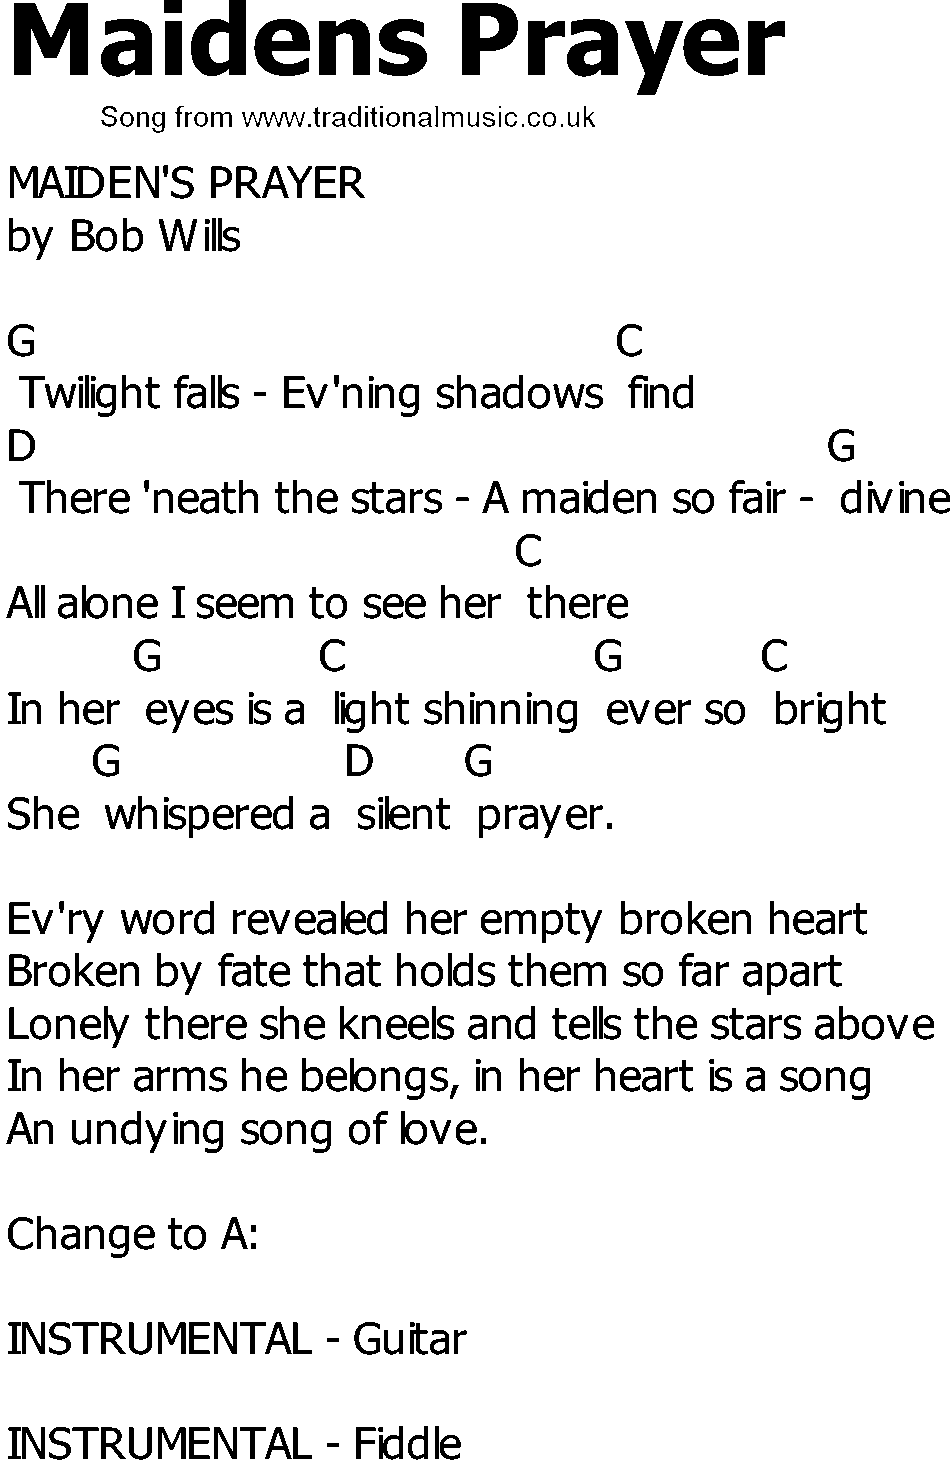 Old Country song lyrics with chords - Maidens Prayer